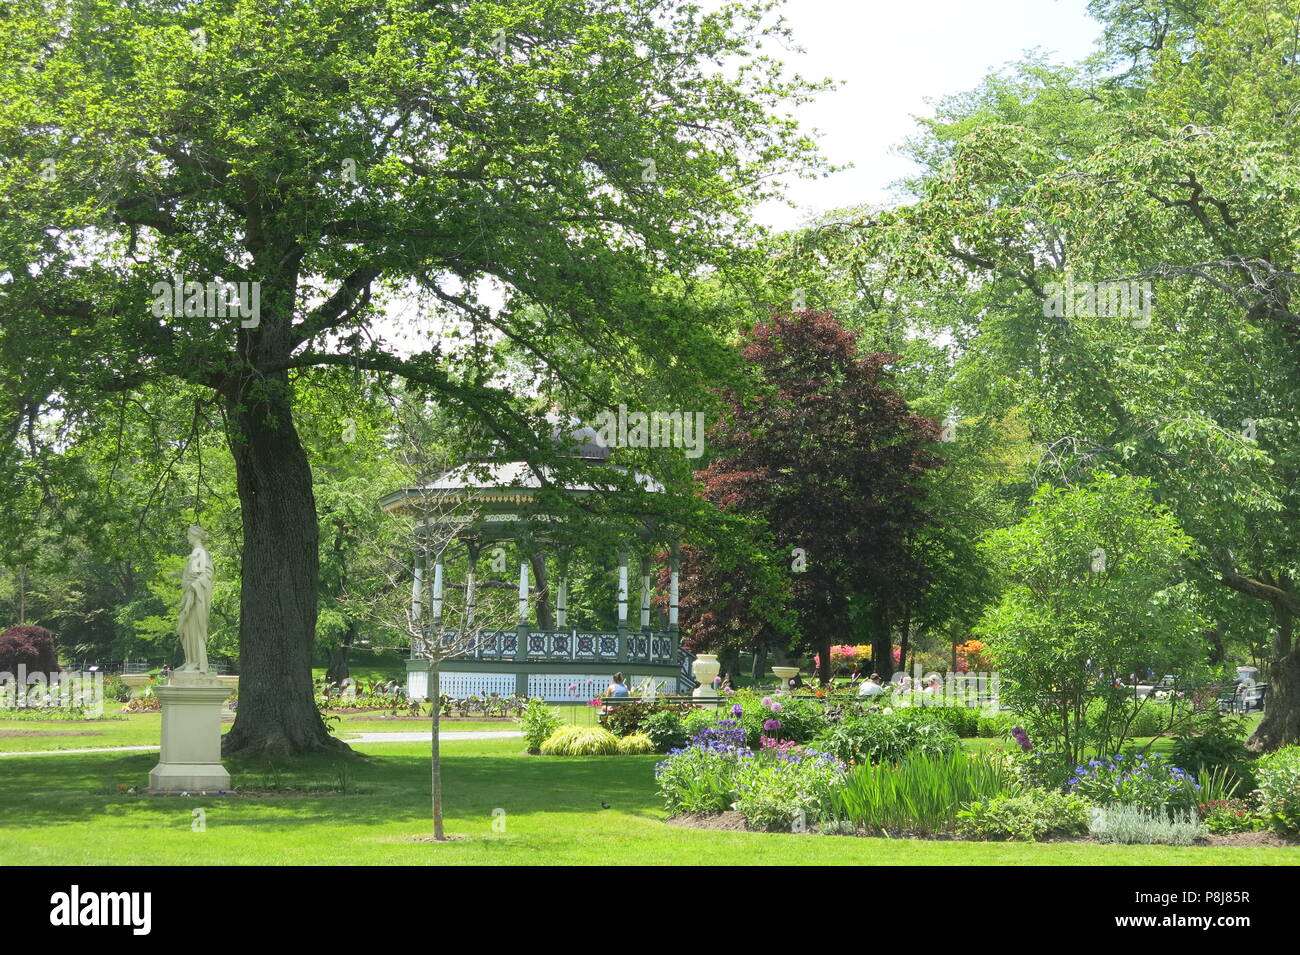 The Halifax Public Gardens have been an oasis of calm and colour since Victorian times; features include a bandstand, statues & fountains Stock Photo